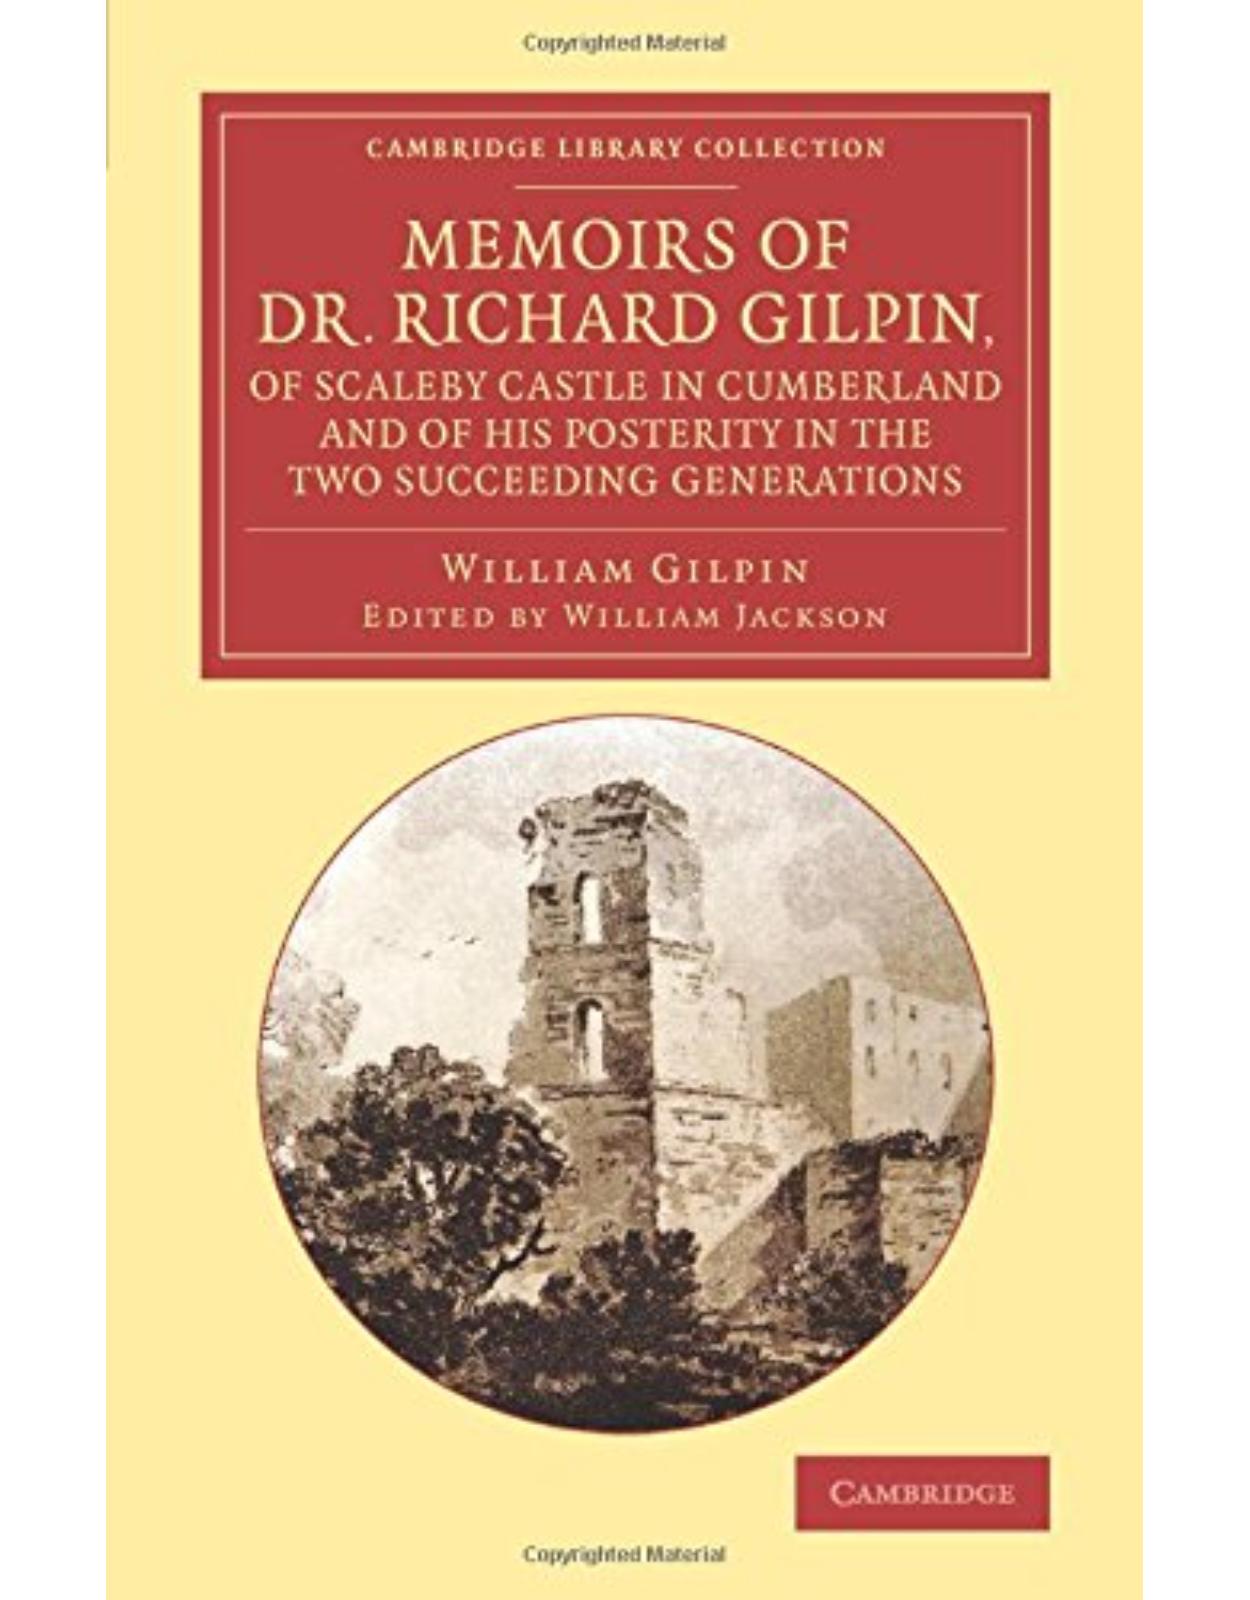 Memoirs of Dr Richard Gilpin, of Scaleby Castle in Cumberland: And of his Posterity in the Two Succeeding Generations (Cambridge Library Collection - Art and Architecture)